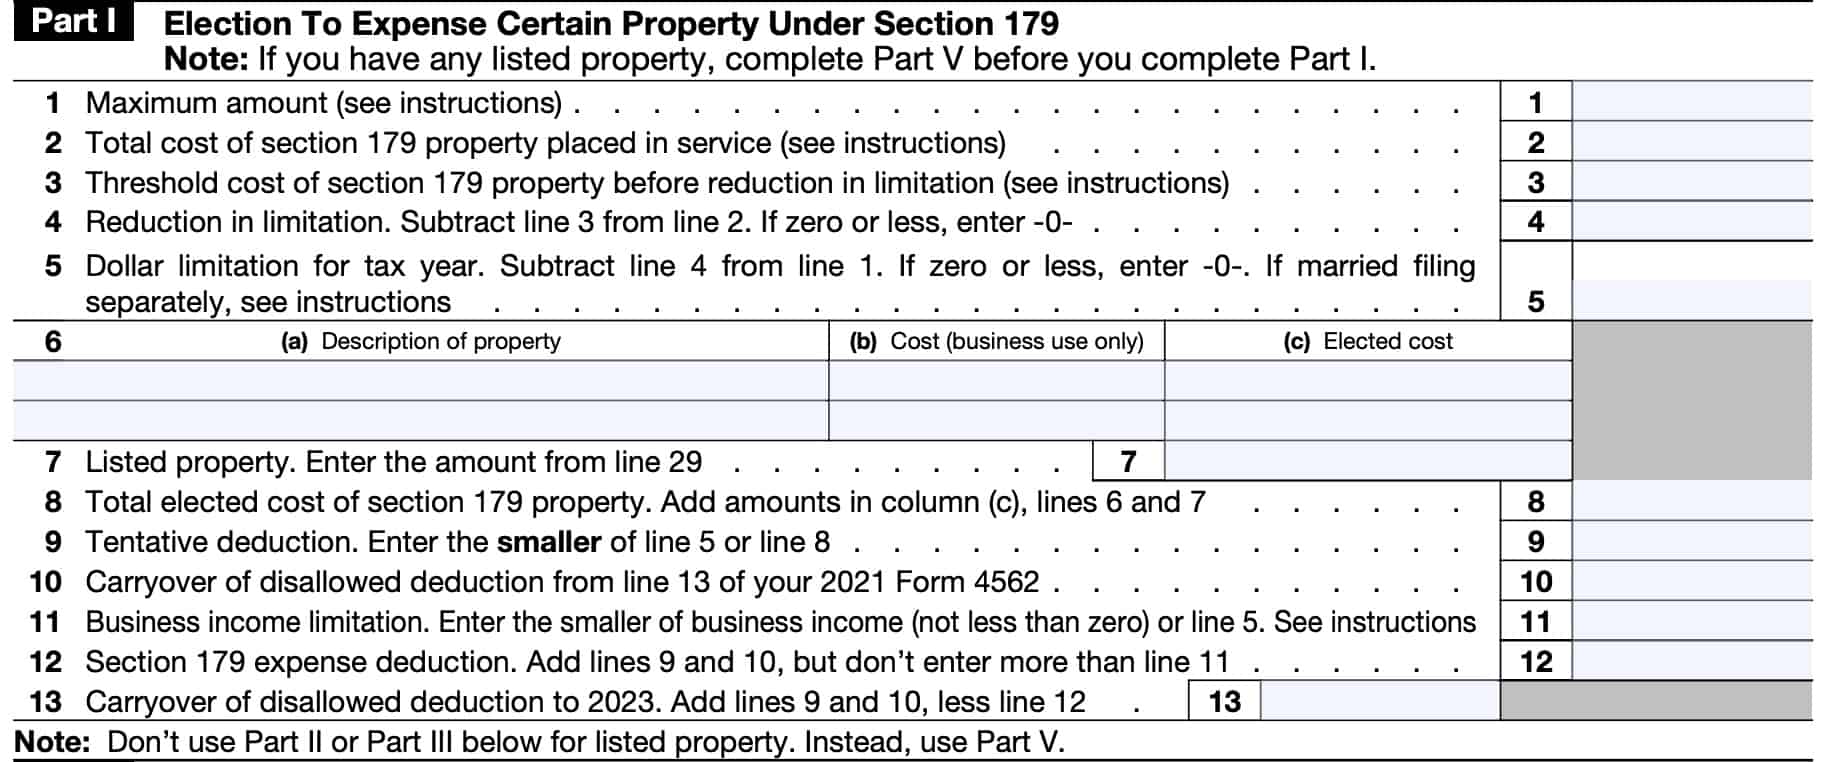 irs form 4562 part i: election to expense certain property under section 179